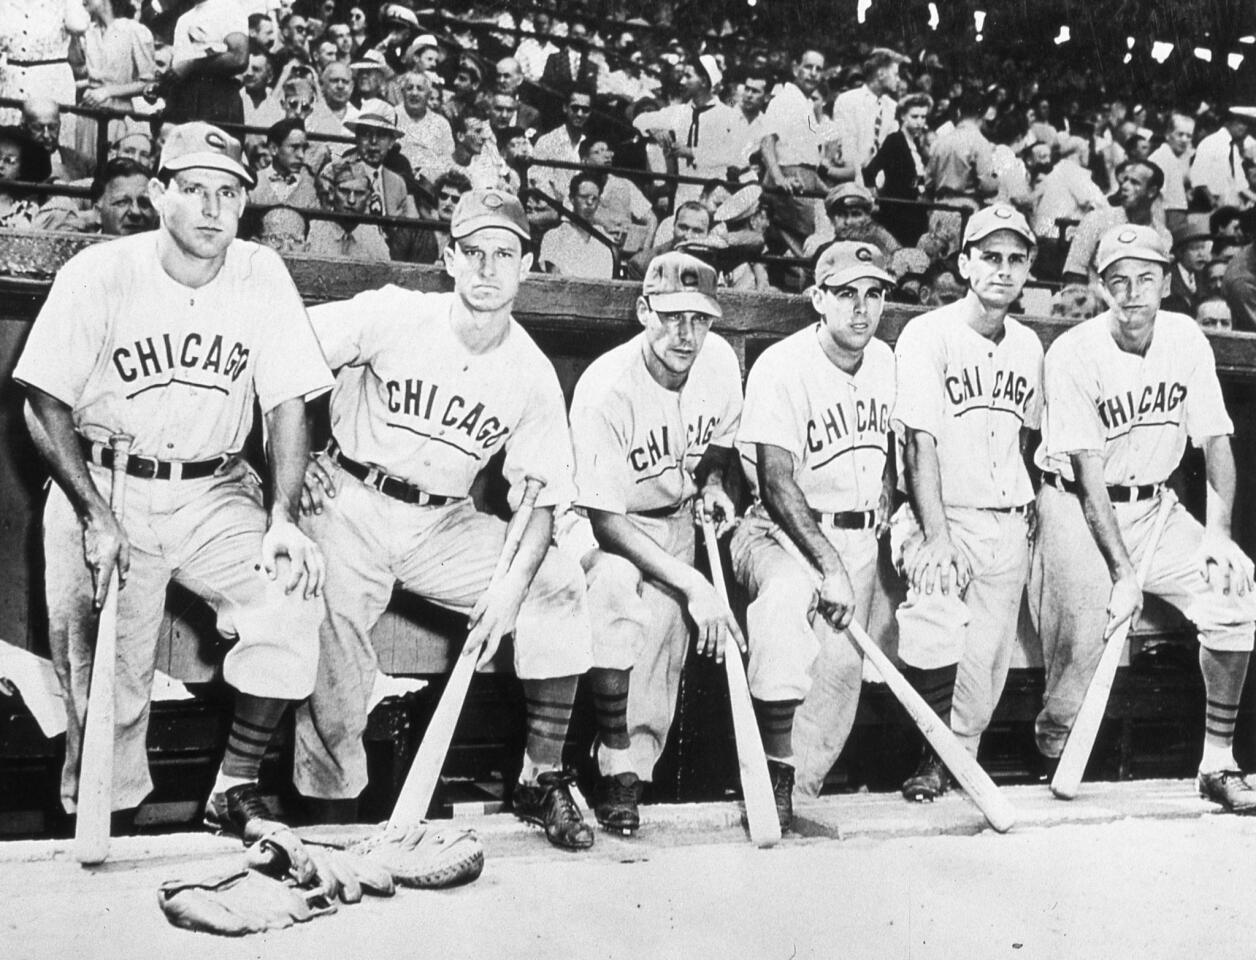 A group of Chicago Cubs pose in their dugout in Wrigley Field on Oct. 6, 1945, before the start of game 4 of the 1945 World Series. These Cubs are, from to right, Swish Nicholson, Andy Pafko, Phil Cavaretta, Peanuts Lowrey, Don Johnson, and Stan Hack.